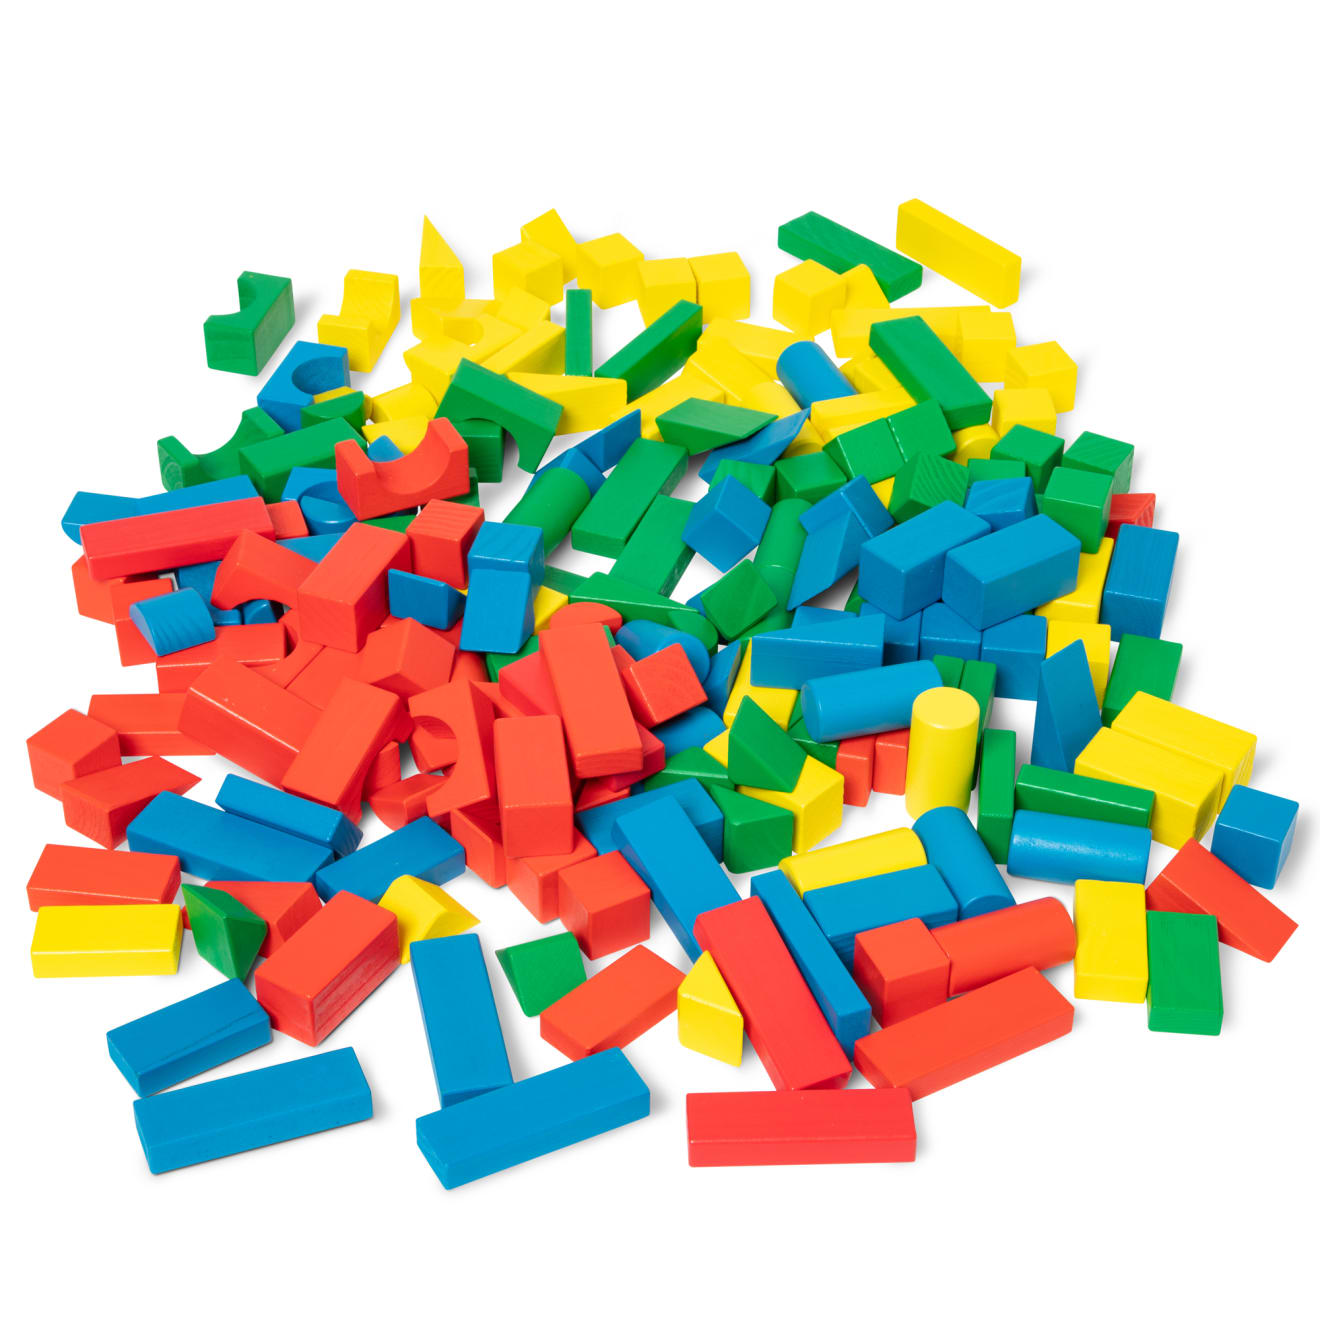 Top Bright Wooden and Plastic Building Blocks Set for Toddlers,Baby Blocks, Size: One Size